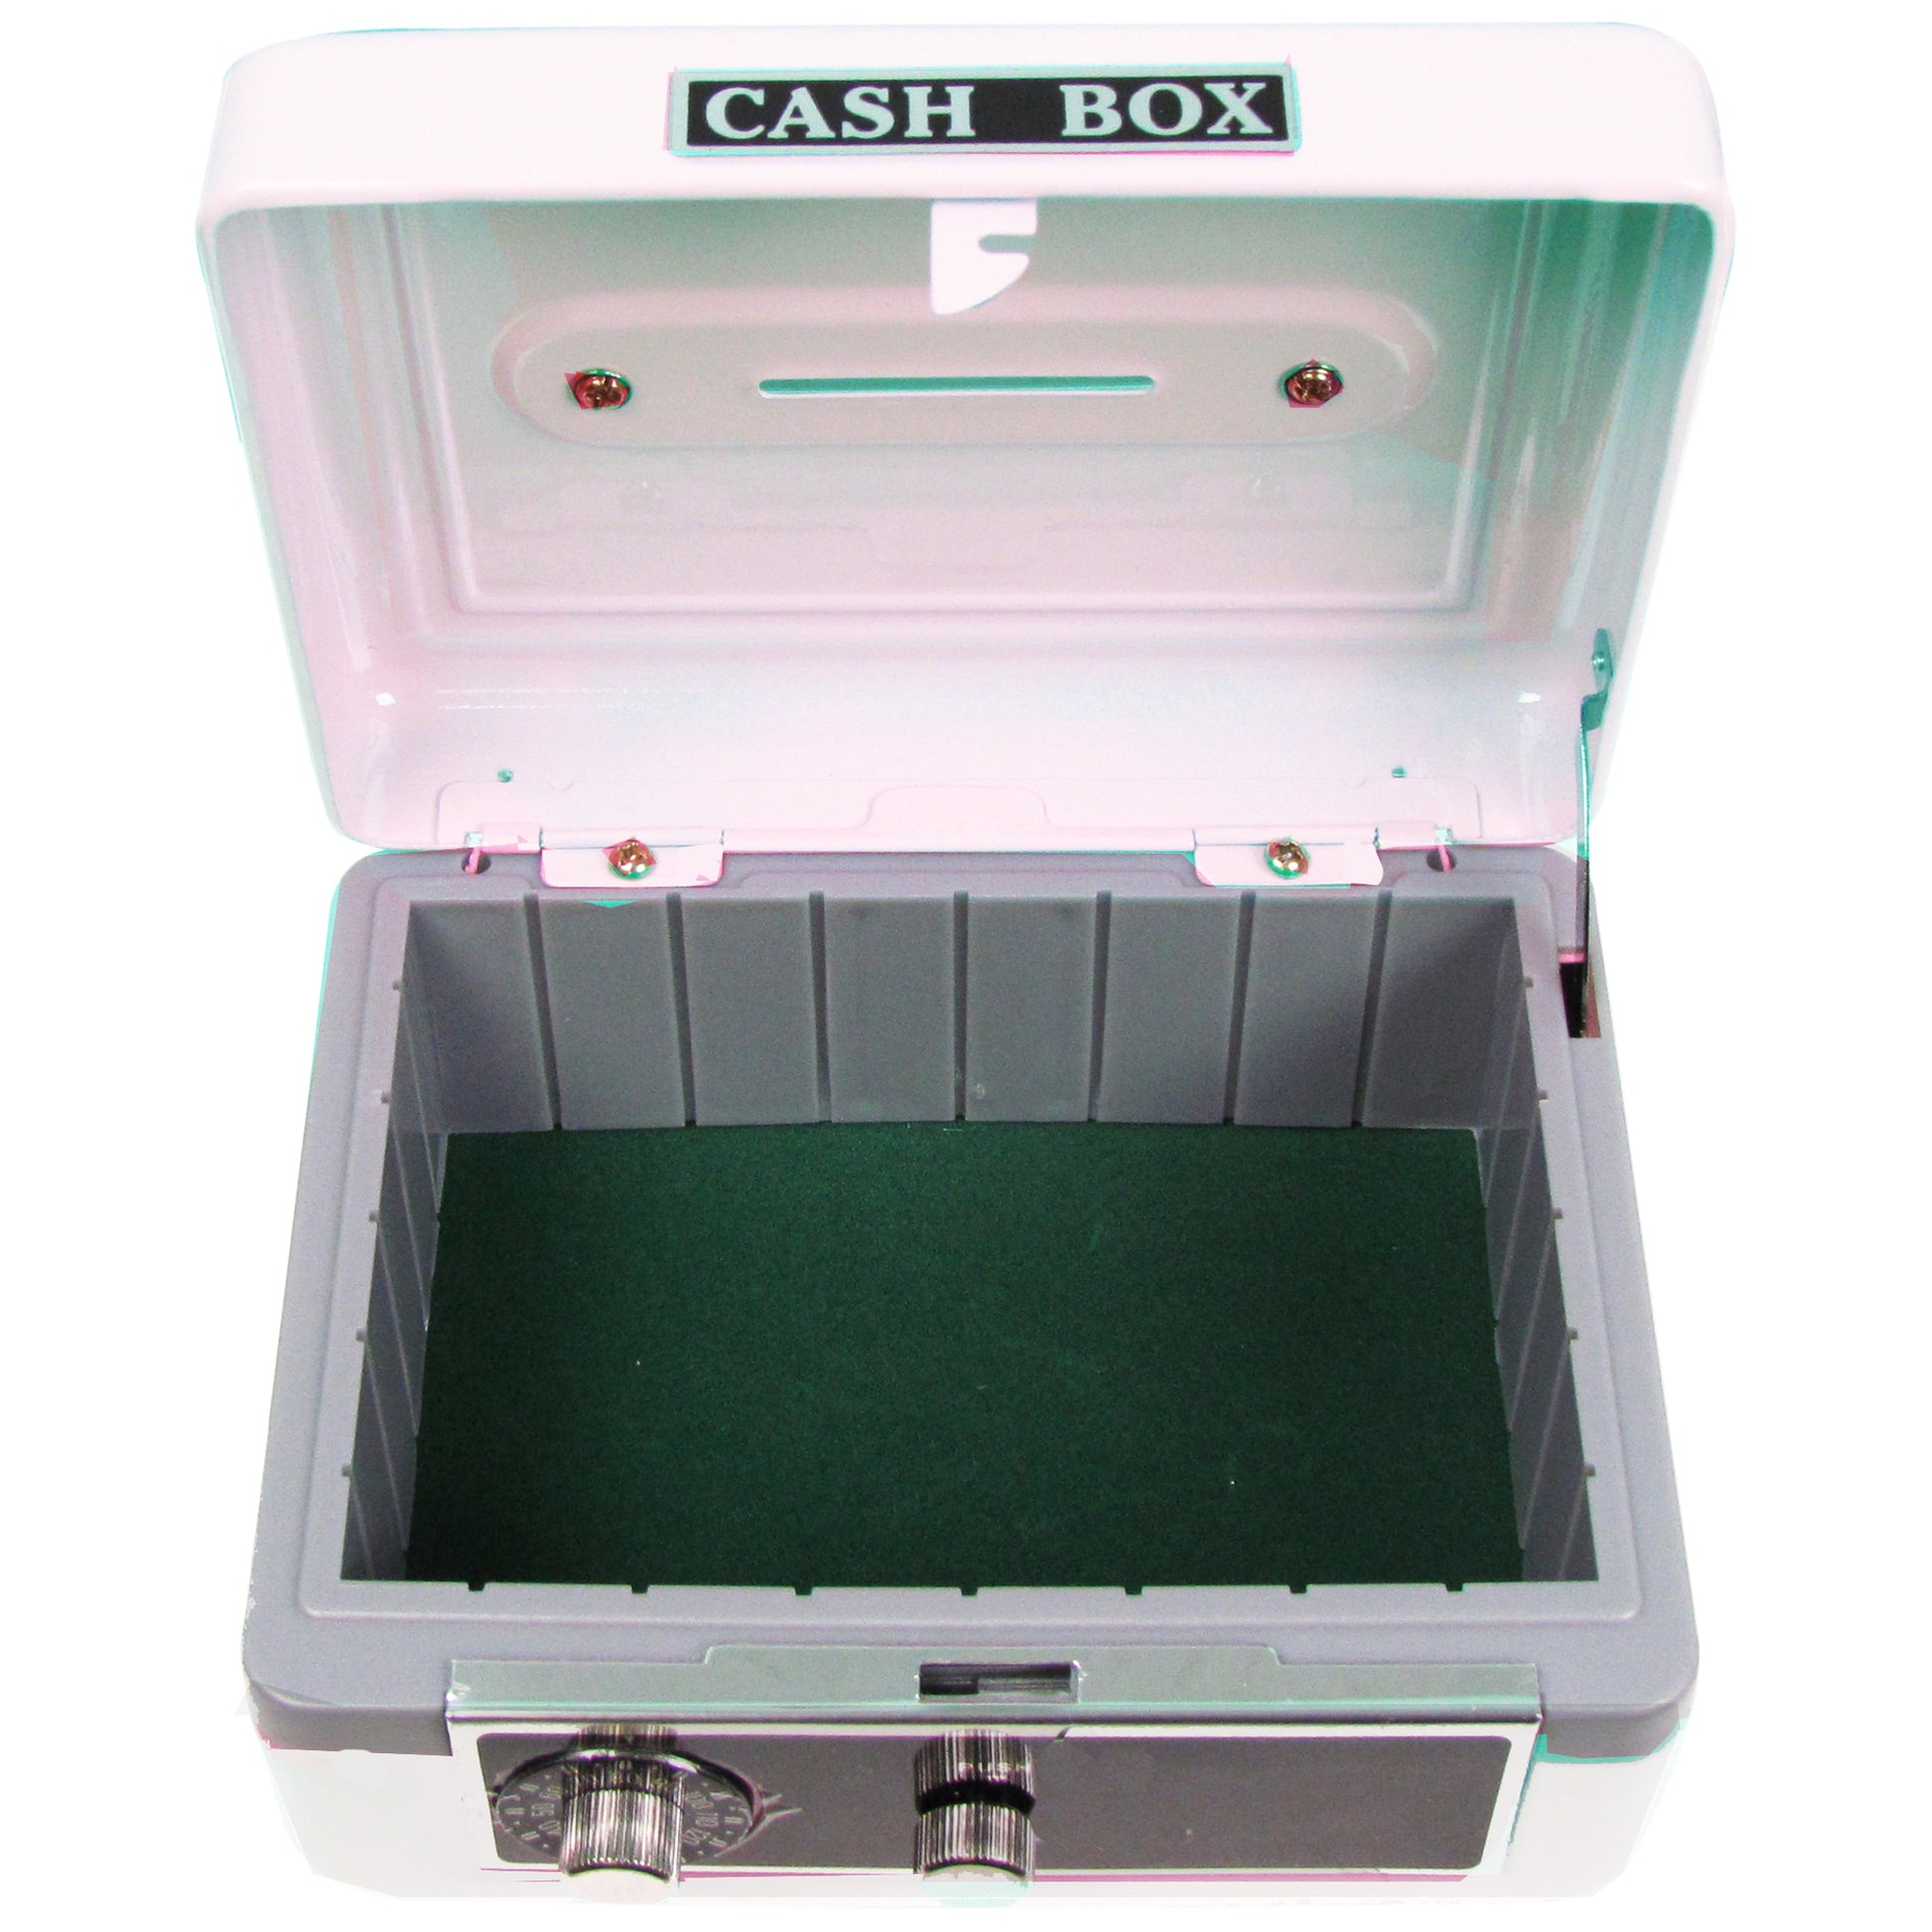 Personalized White Cash Box with Racer design